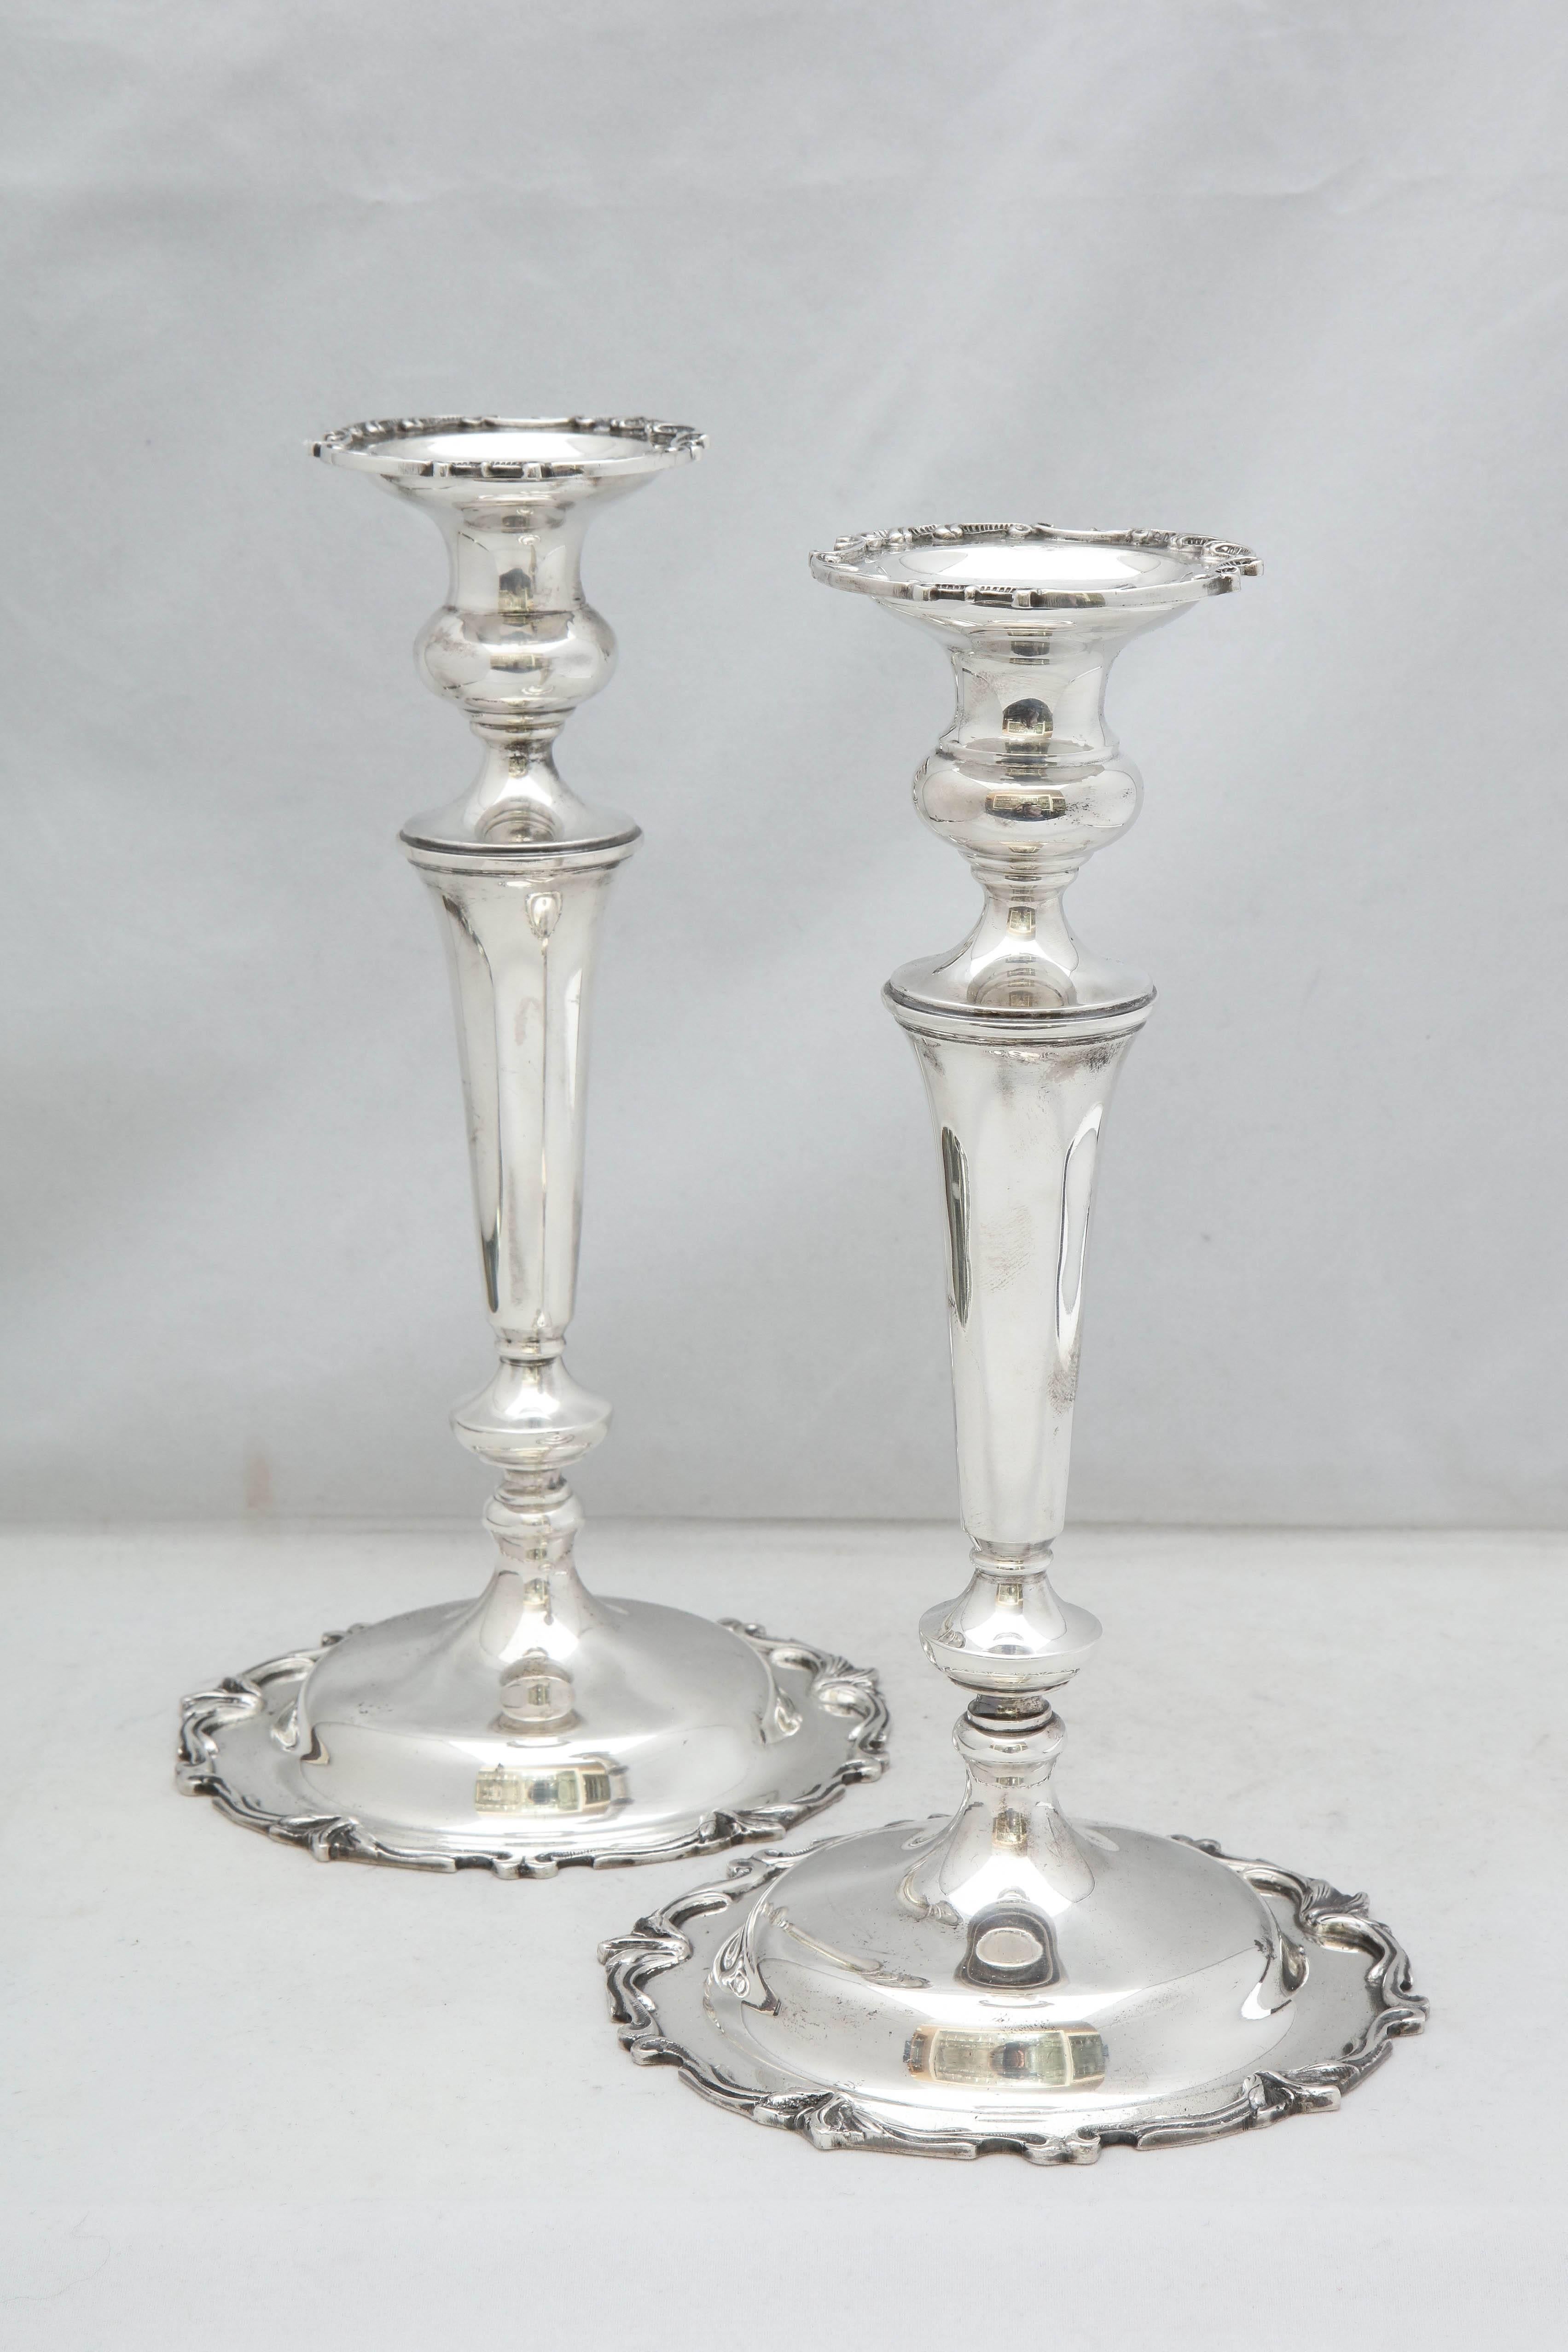 Pair of tall, sterling silver, Edwardian style candlesticks, Michael C. Fina Co., New York, circa 1930s. Measure approximately 10 1/8 inches high x over 5 1/2 inches in diameter across base of each. Design on edge of base of each is continued on